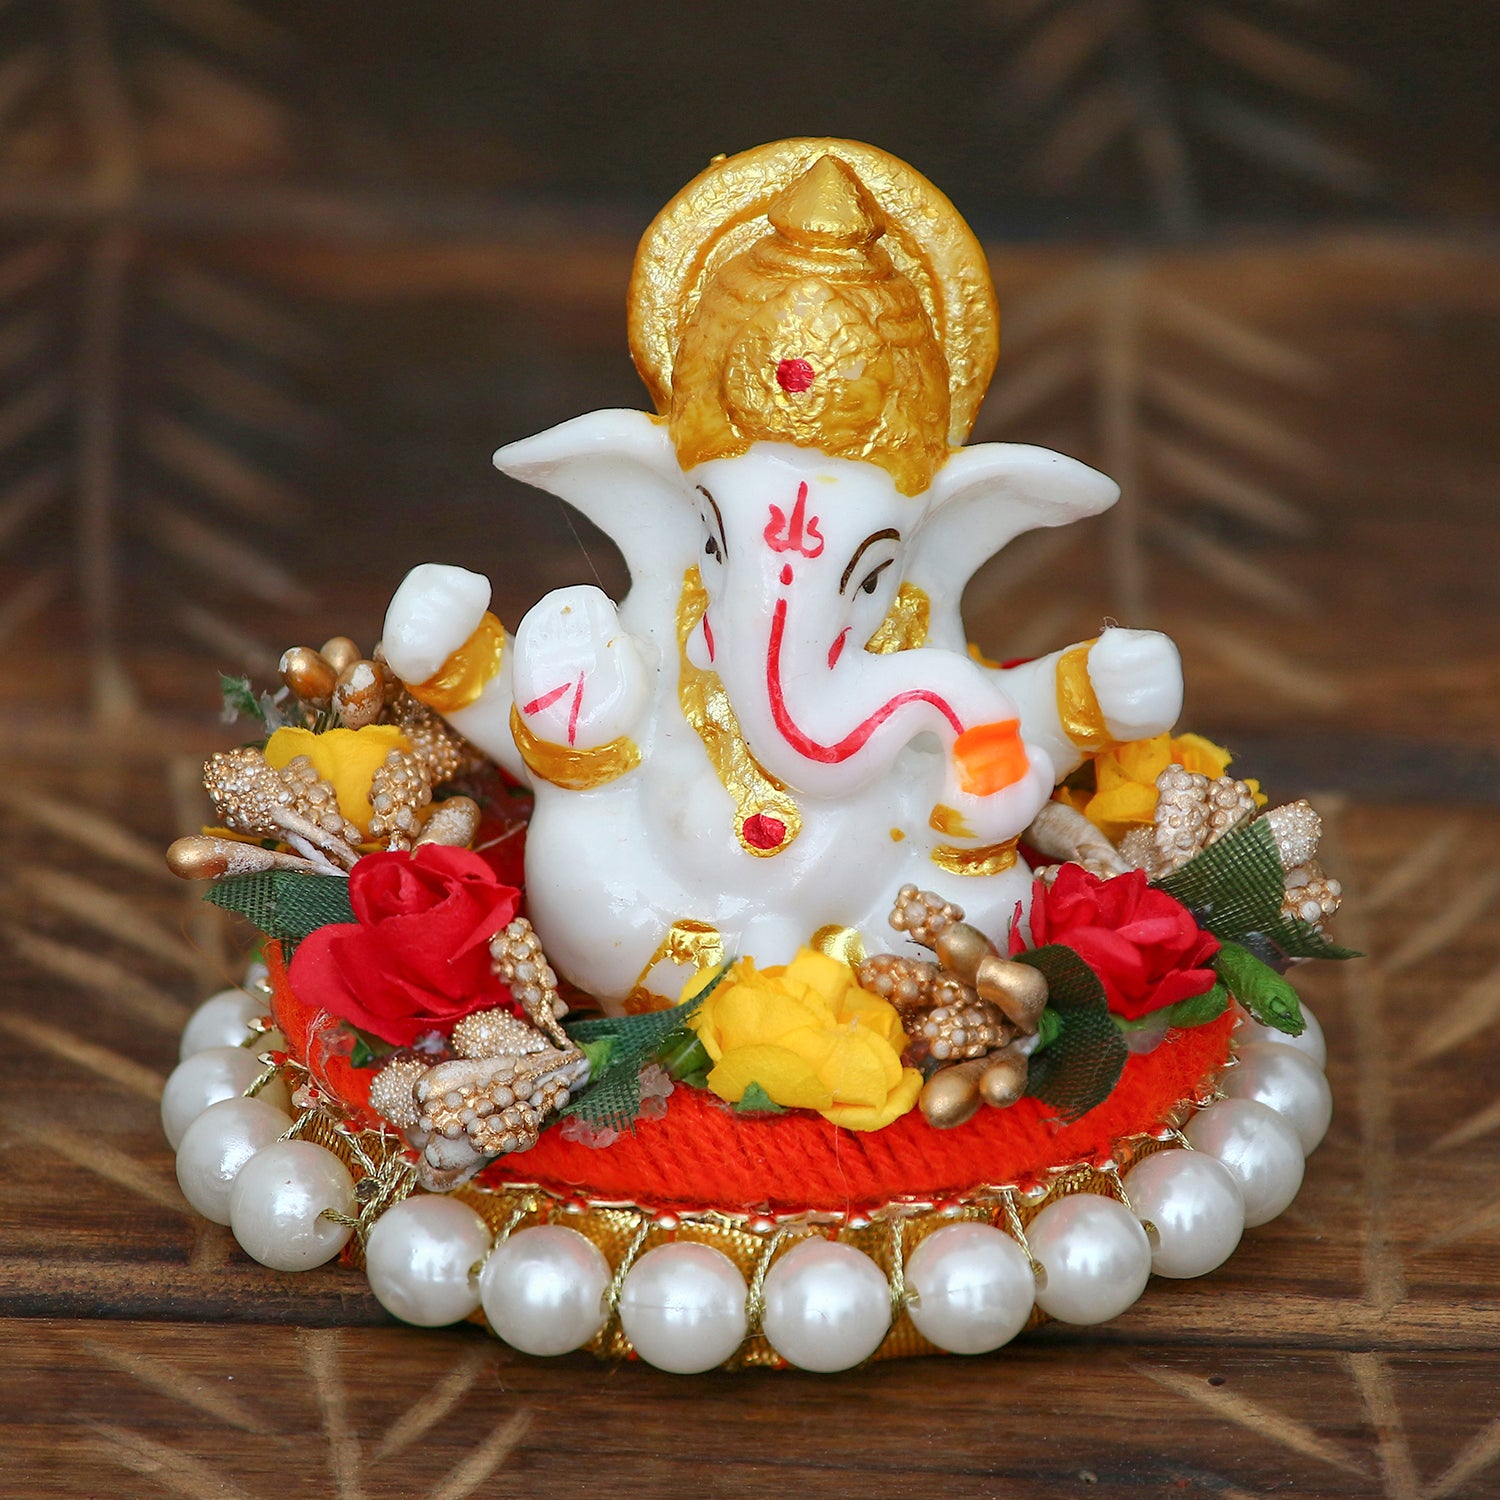 Polyresin Lord Ganesha Statue on Decorative Handcrafted Plate for Home, Office and Car Dashboard